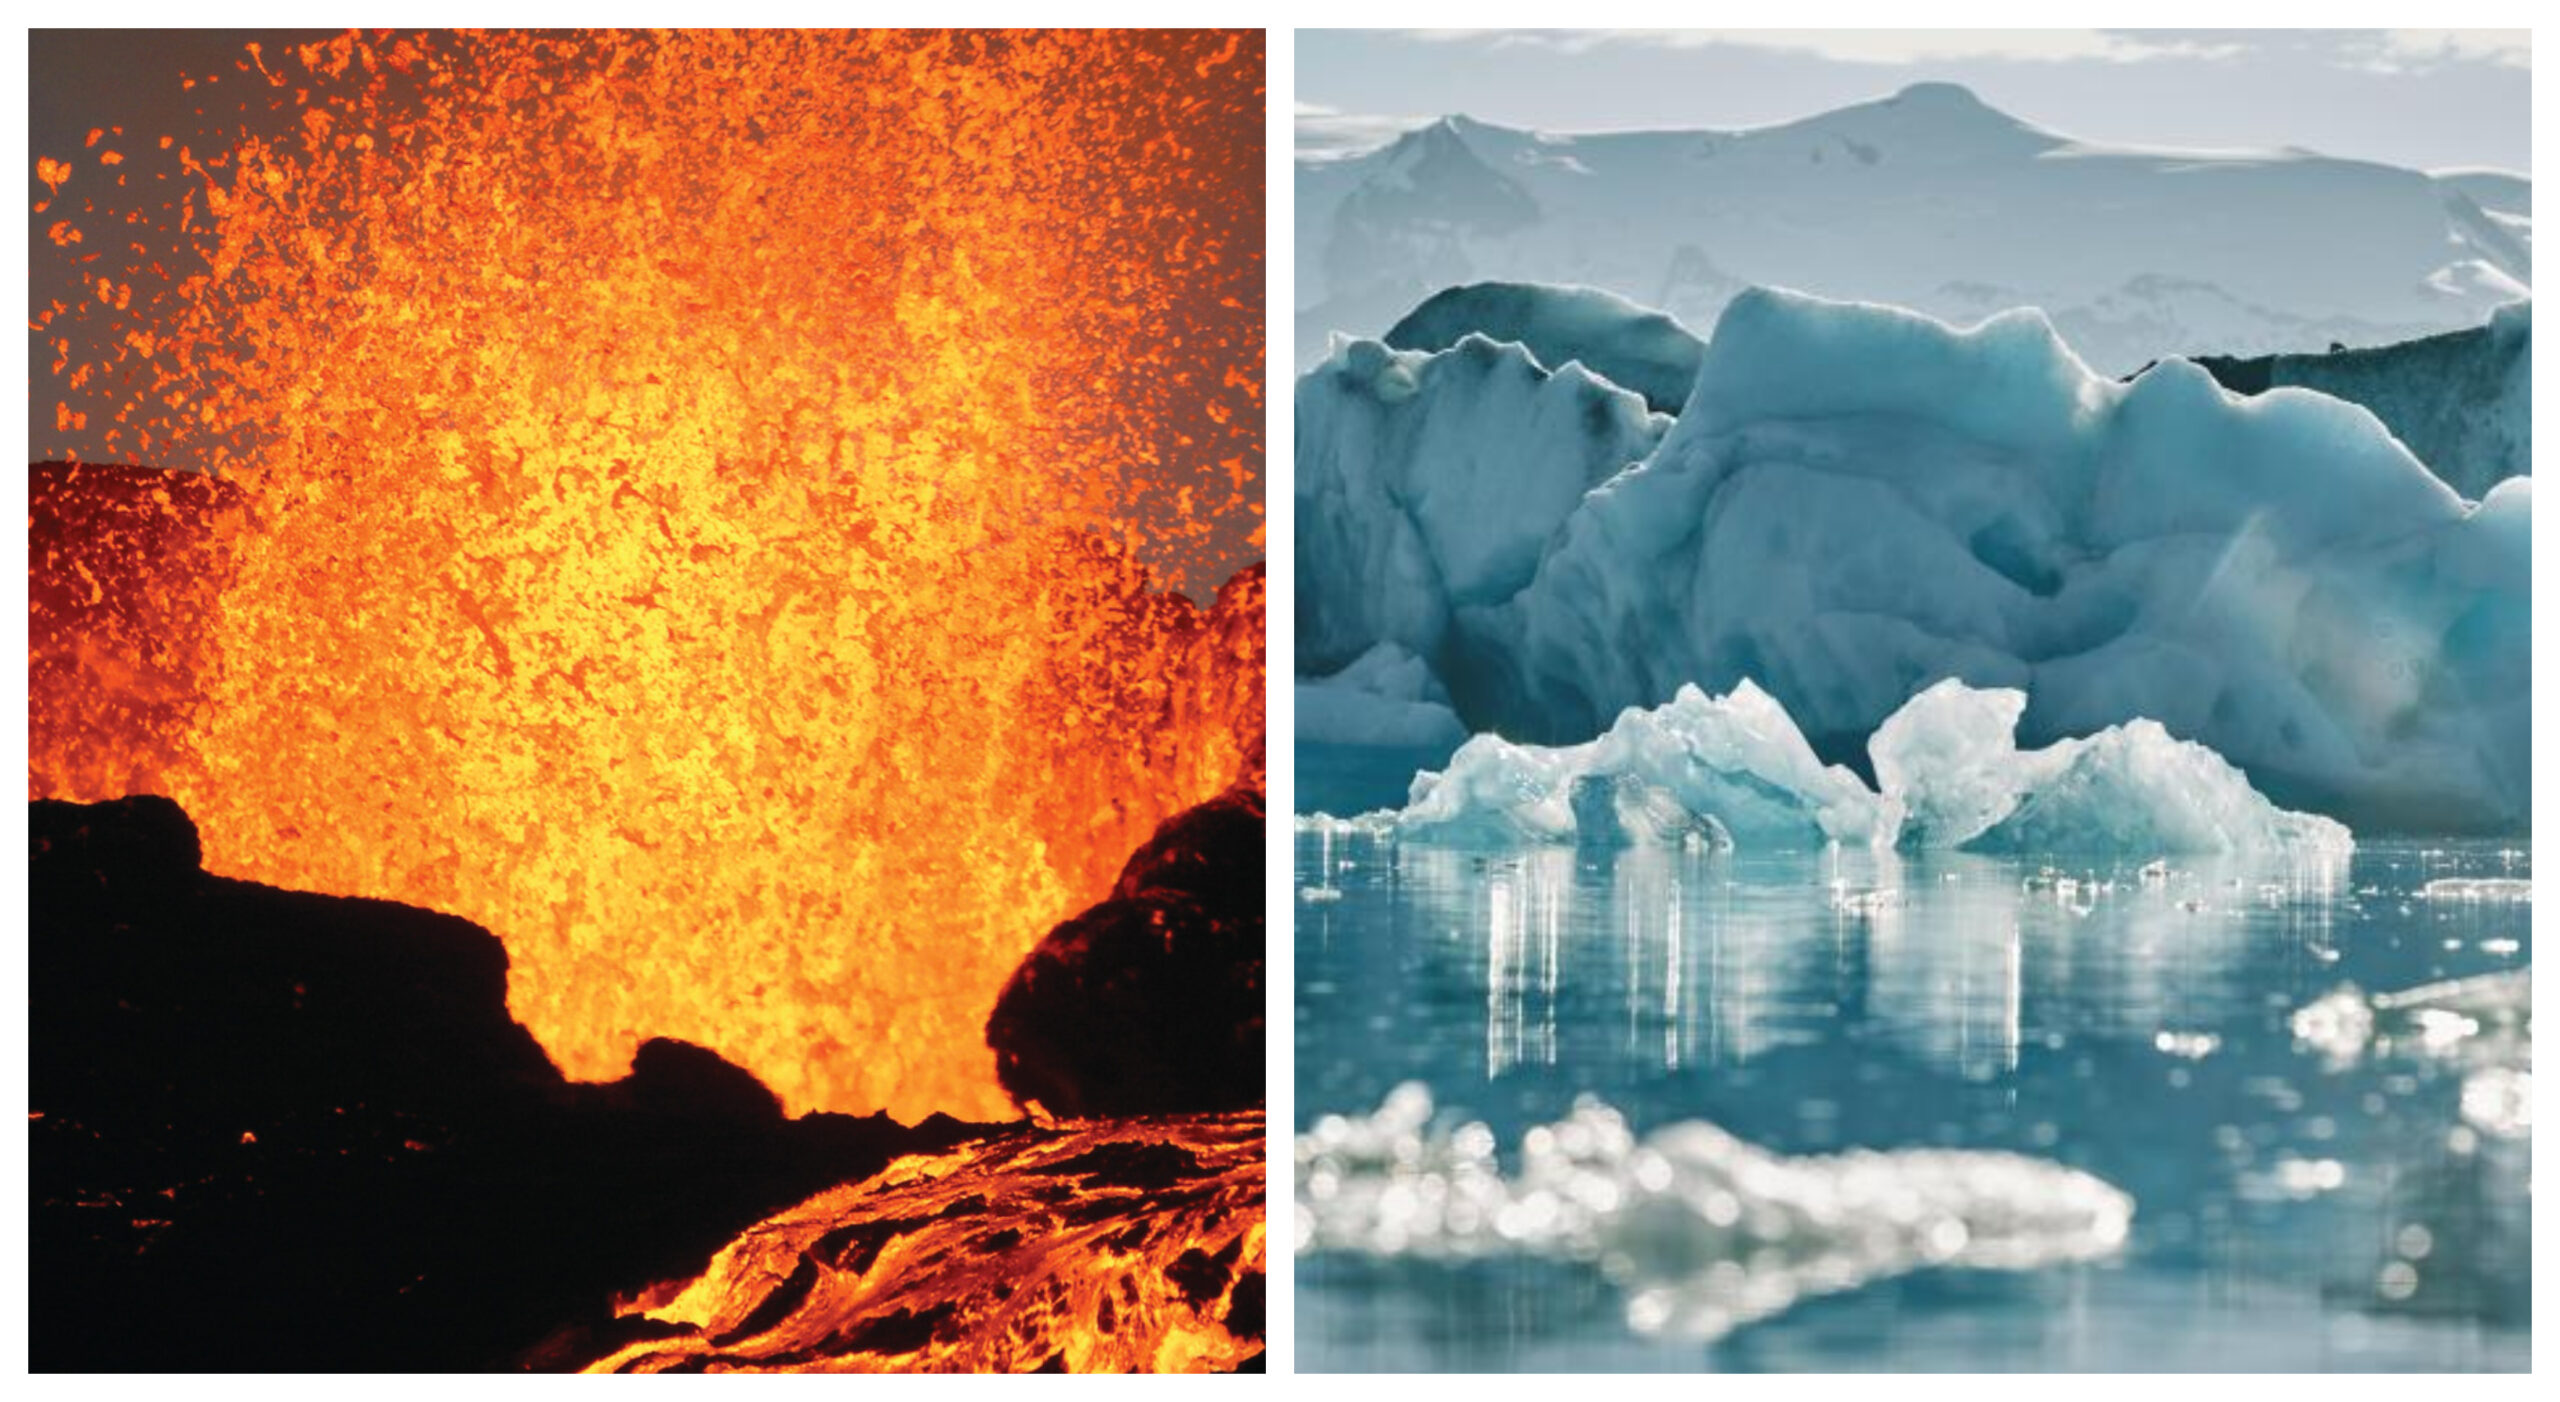 NASA: Volcanic eruption may increase the risk of ice age, know why and how?, nasa-scientists-saying-that-ice-age-can-come-due-to-volcanic-eruption in hindi news, Volcano, Volcanic Eruption, GK, ABP News, Ice Age, What is Ice Age, Carbon Dioxide, Greenhouse Gas, Global Cooling, What is Global Cooling,